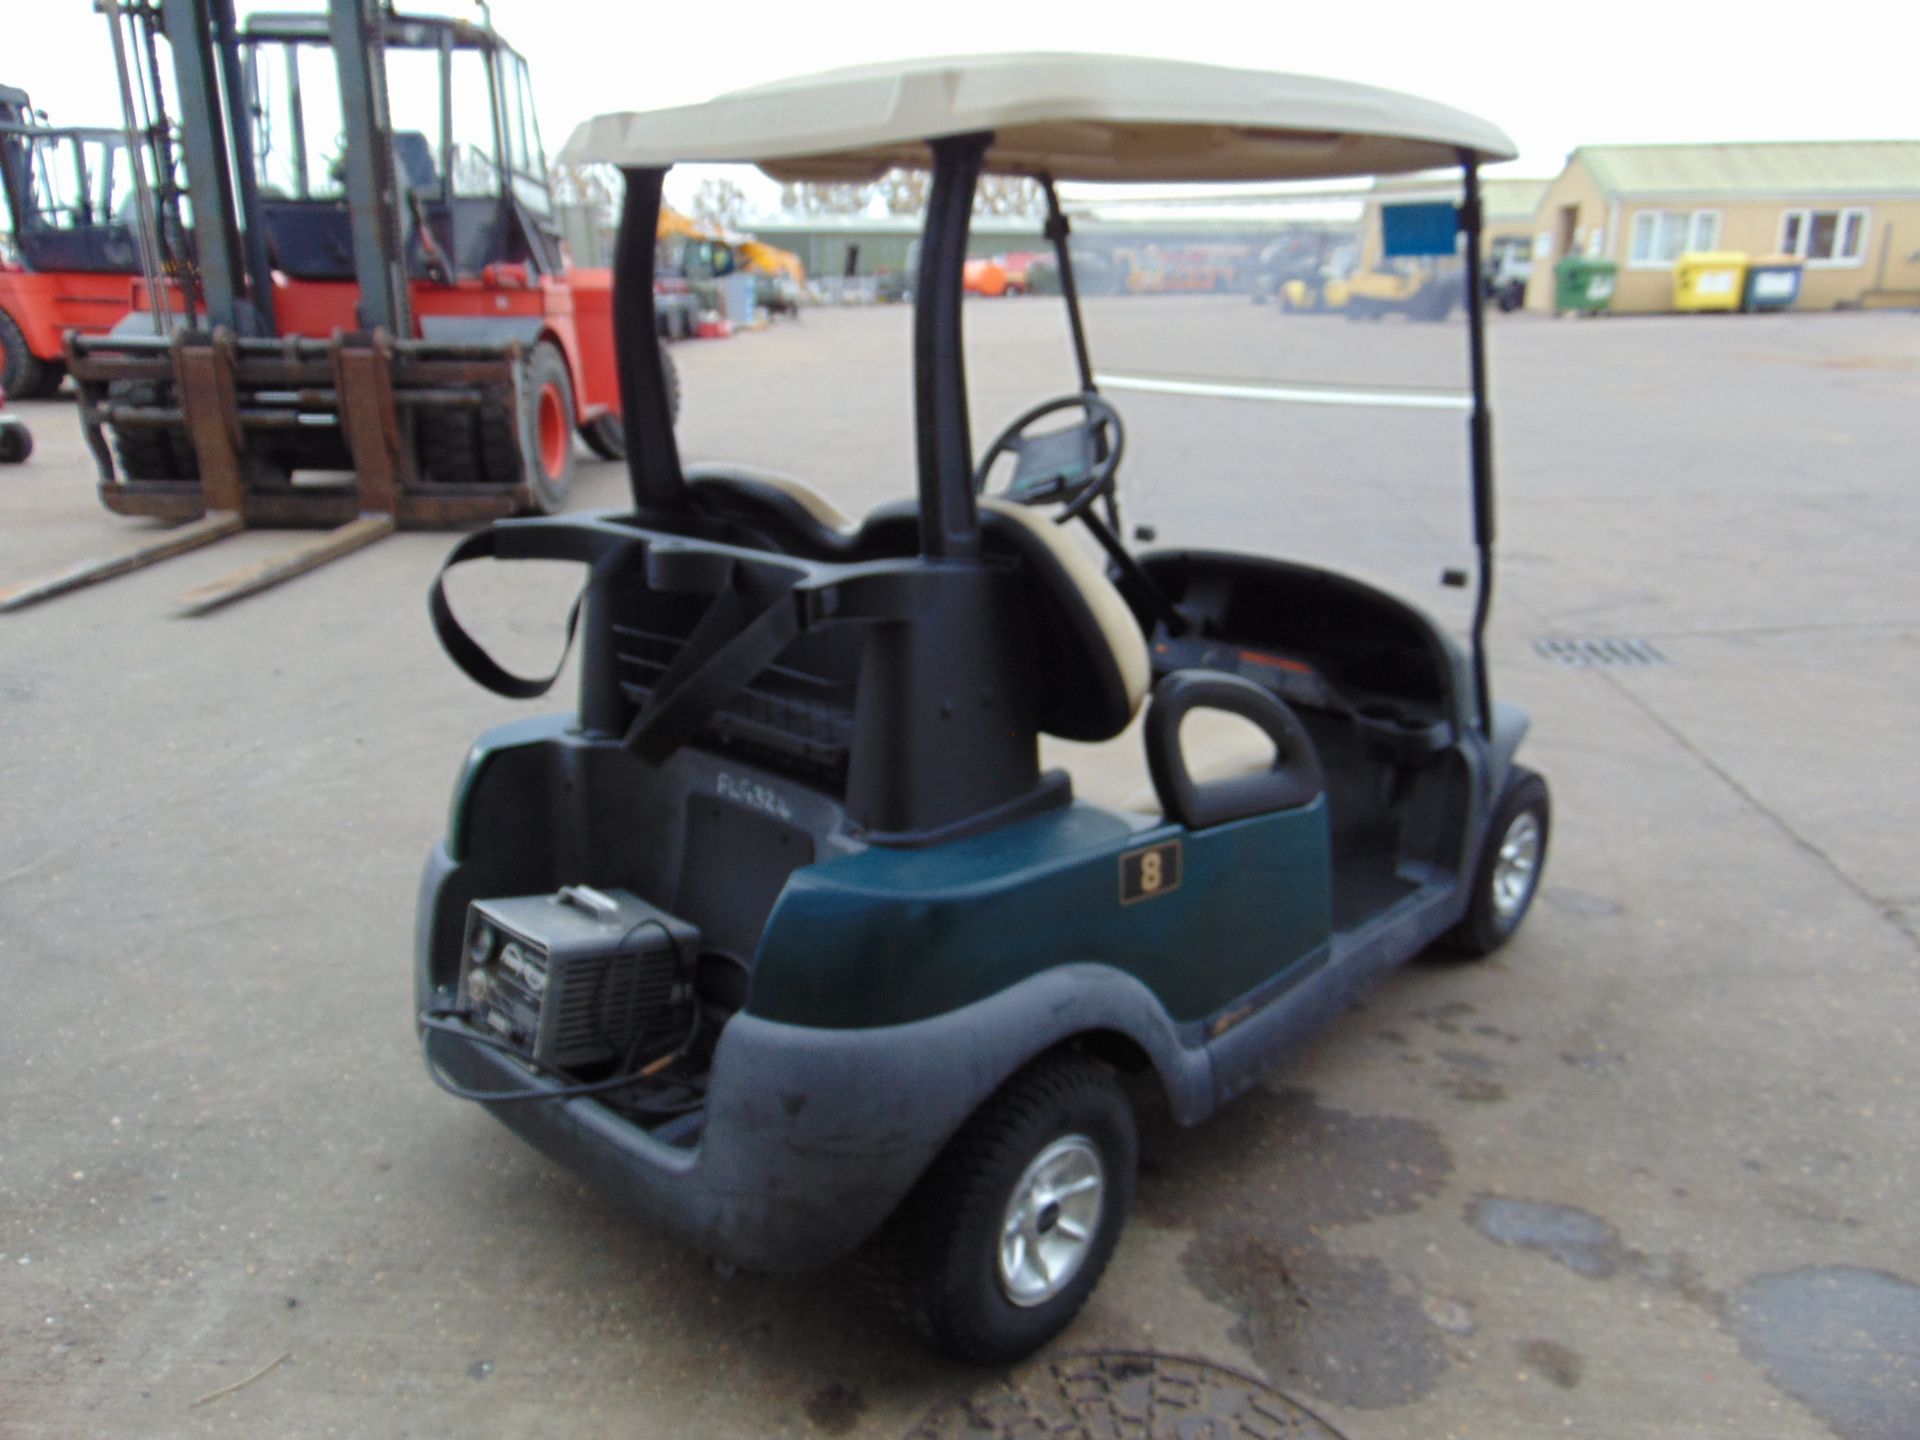 Club Car 2 Seat Electric Golf Buggy C/W Battery Charger - Image 8 of 13